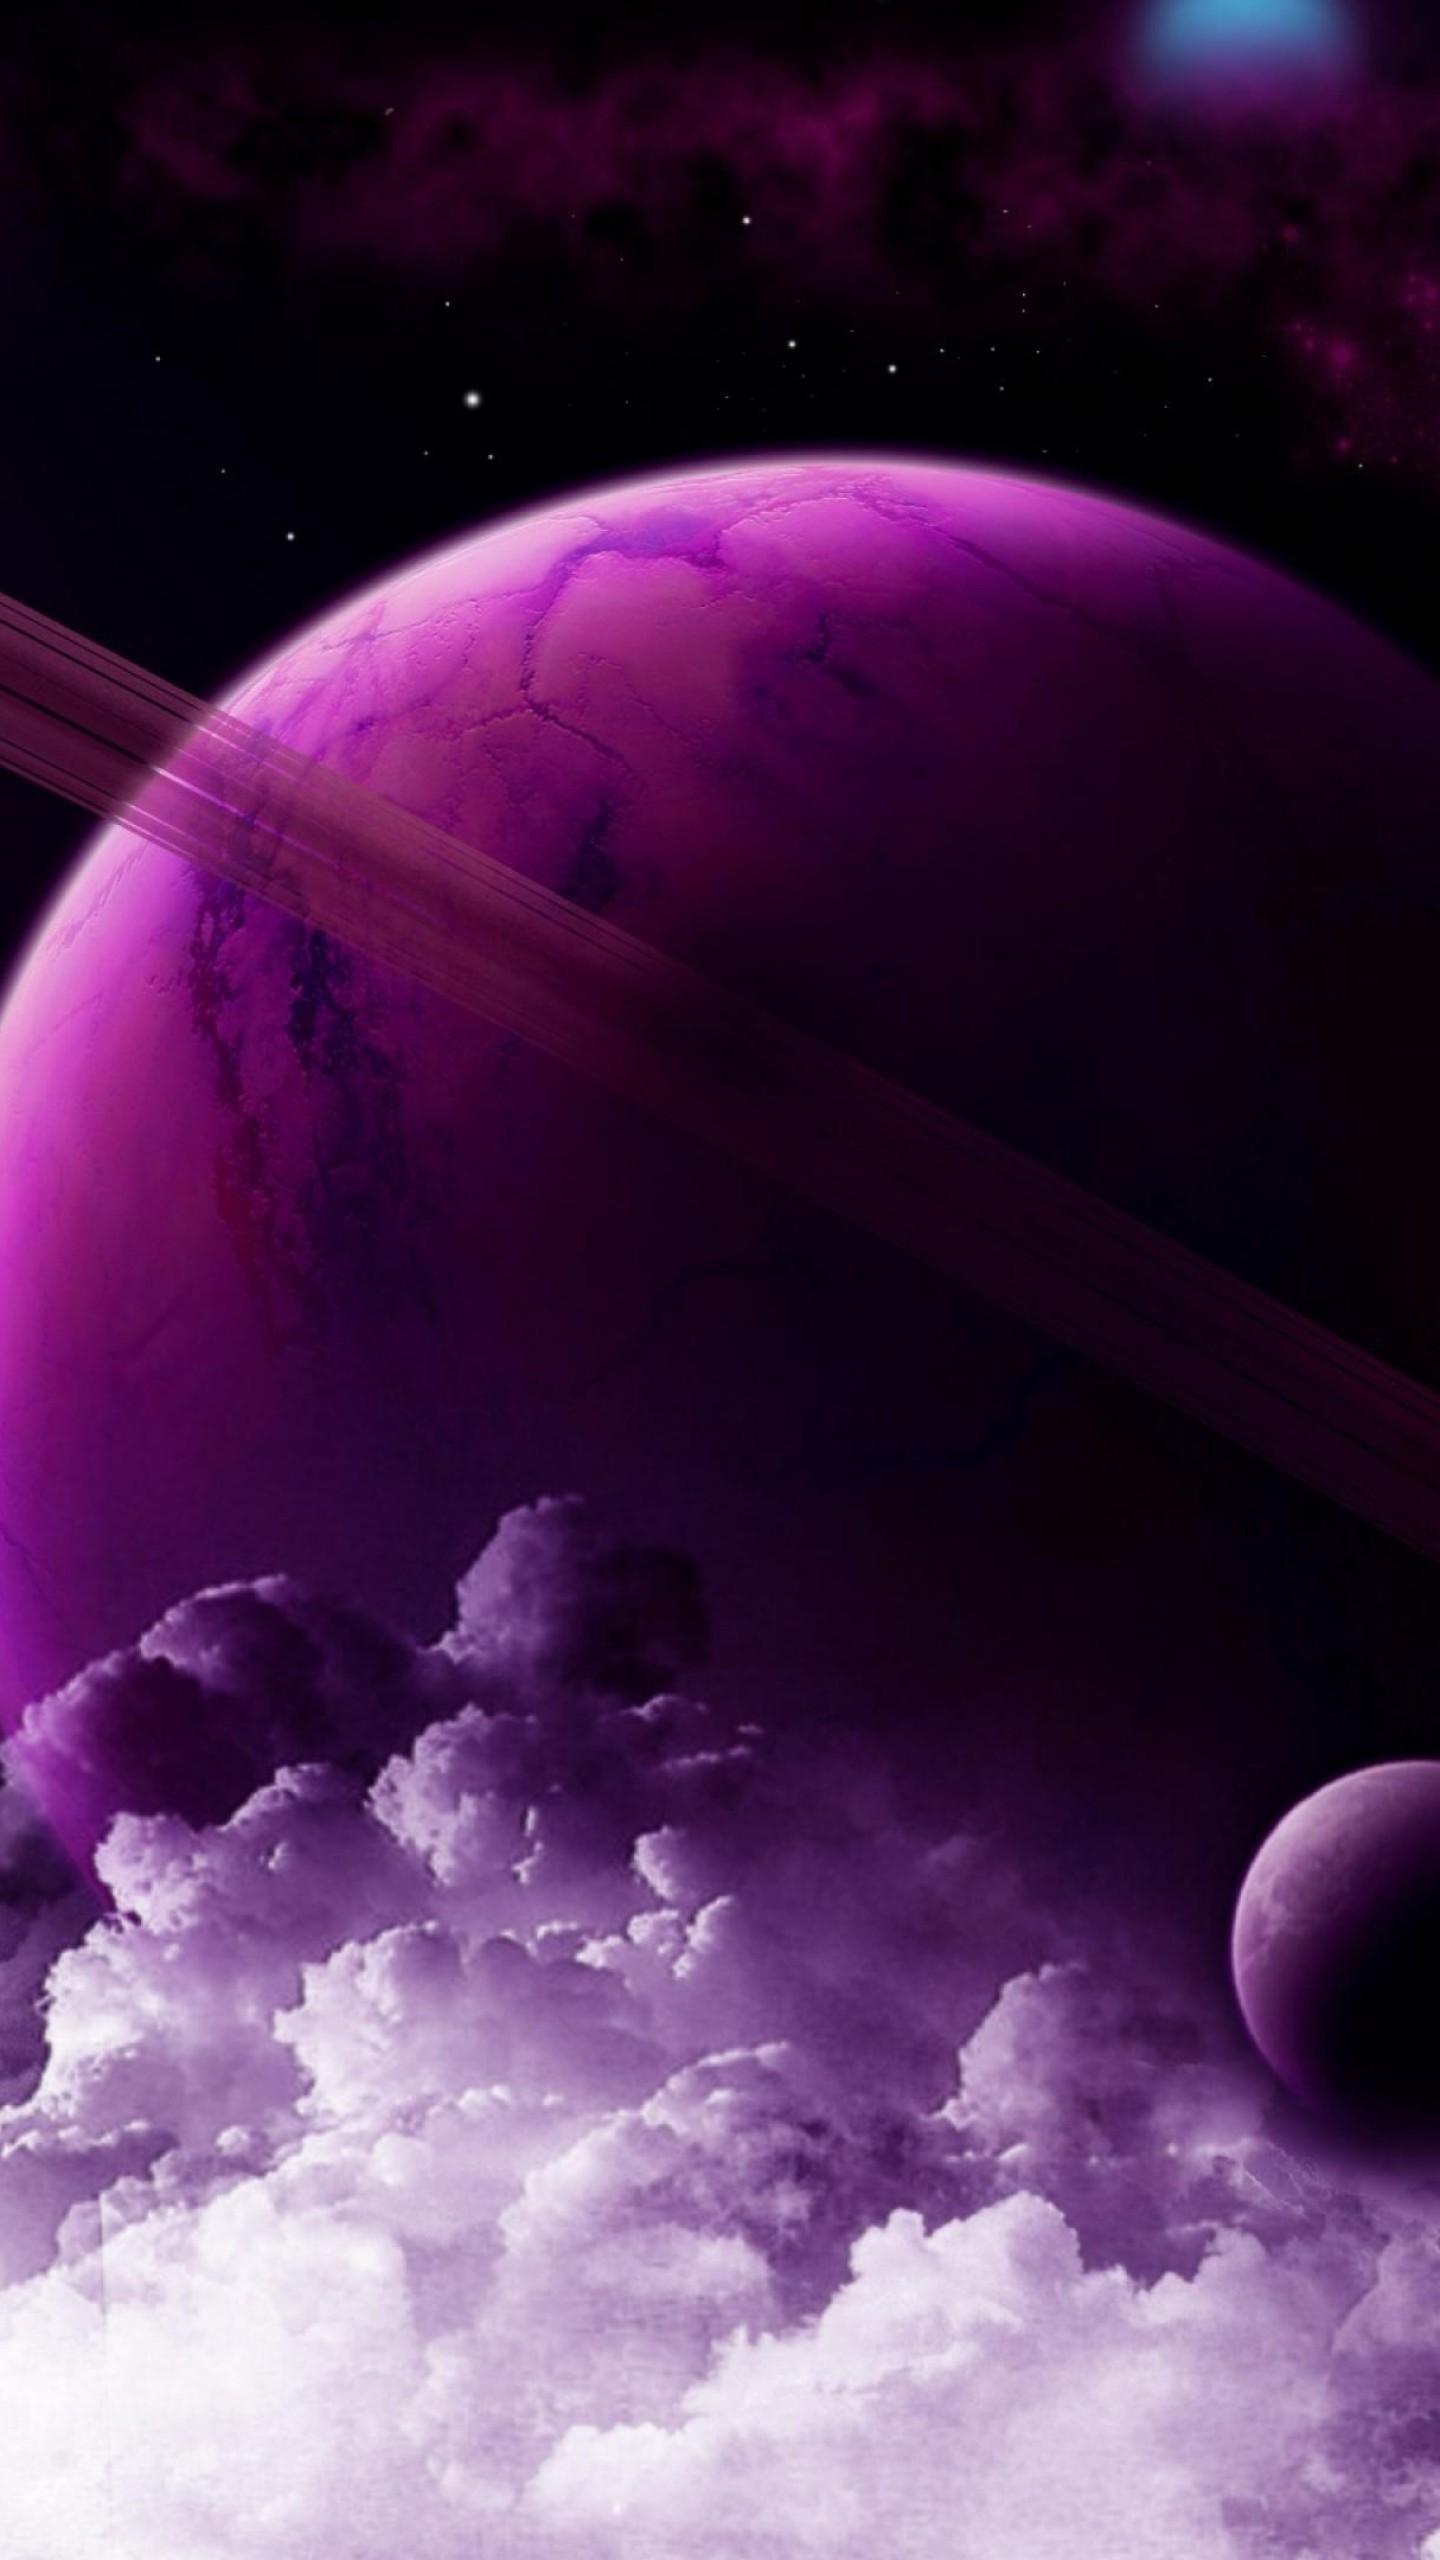 100+] Galaxy Planet Wallpapers | Wallpapers.com